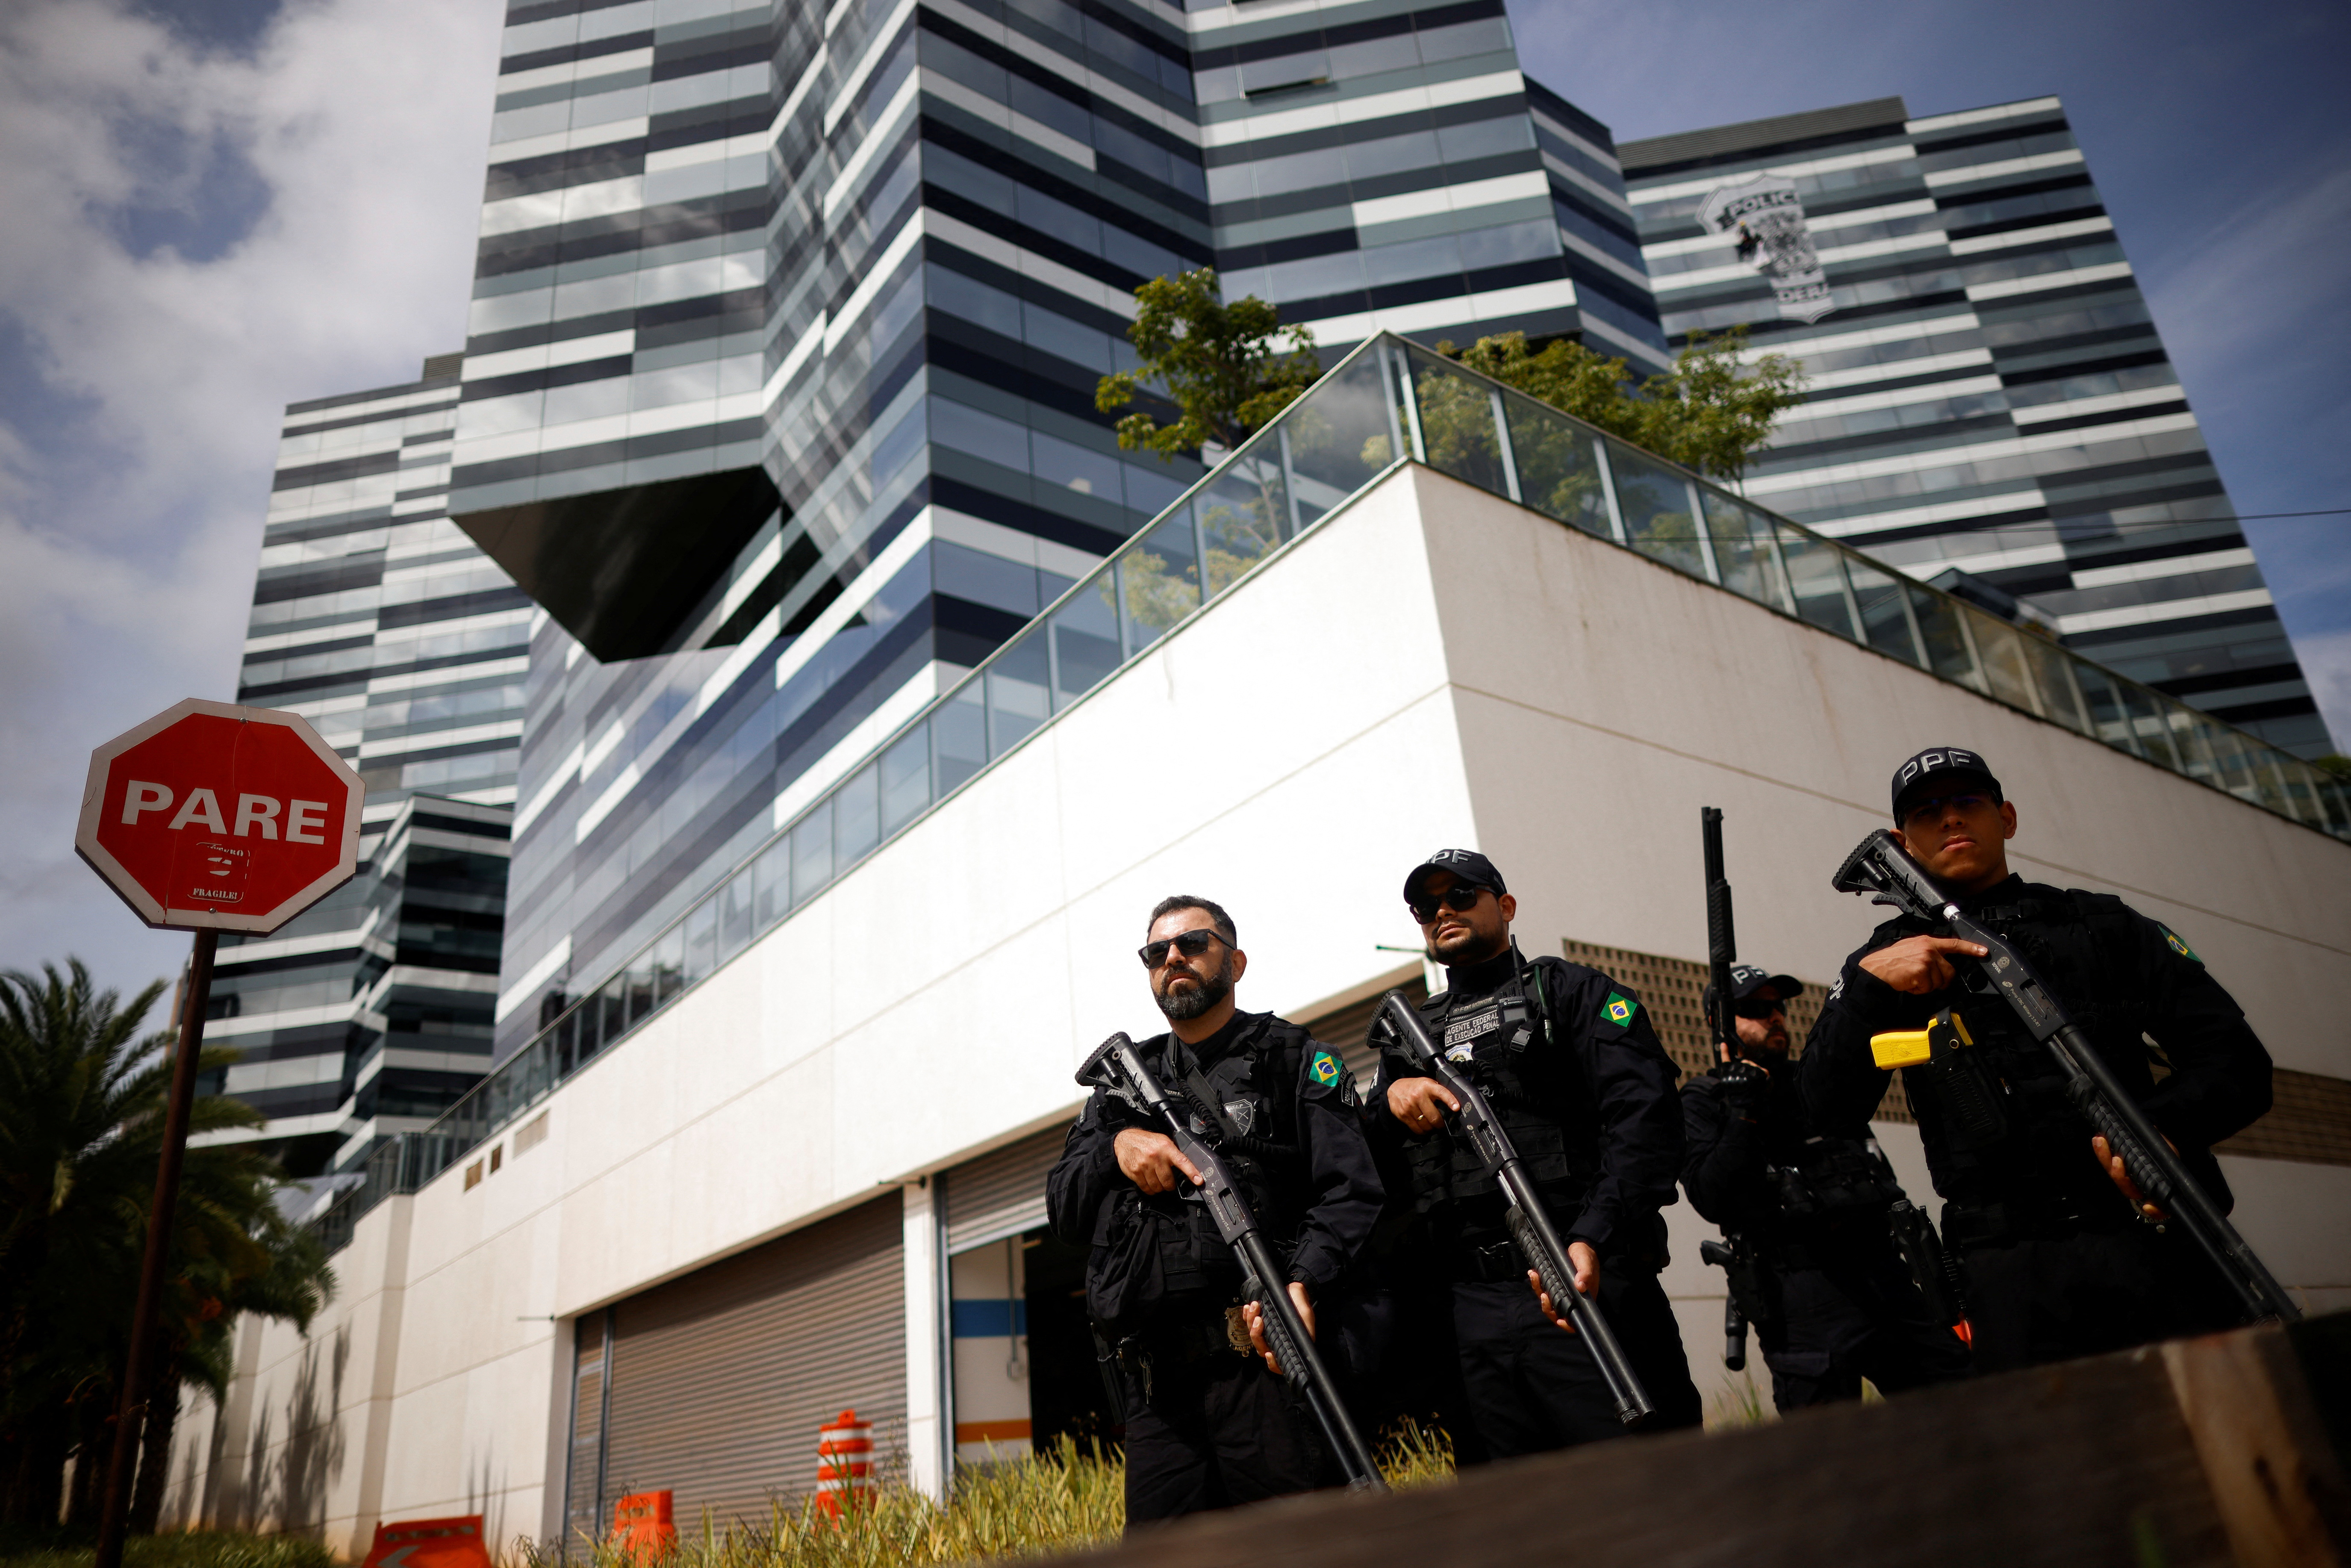 Federal prison officers take position in front of federal police headquarters during an action by Federal Police and agents of the Civil Police of Brasilia, to serve arrests and seizure warrants issued by the Federal Supreme Court in Brasilia